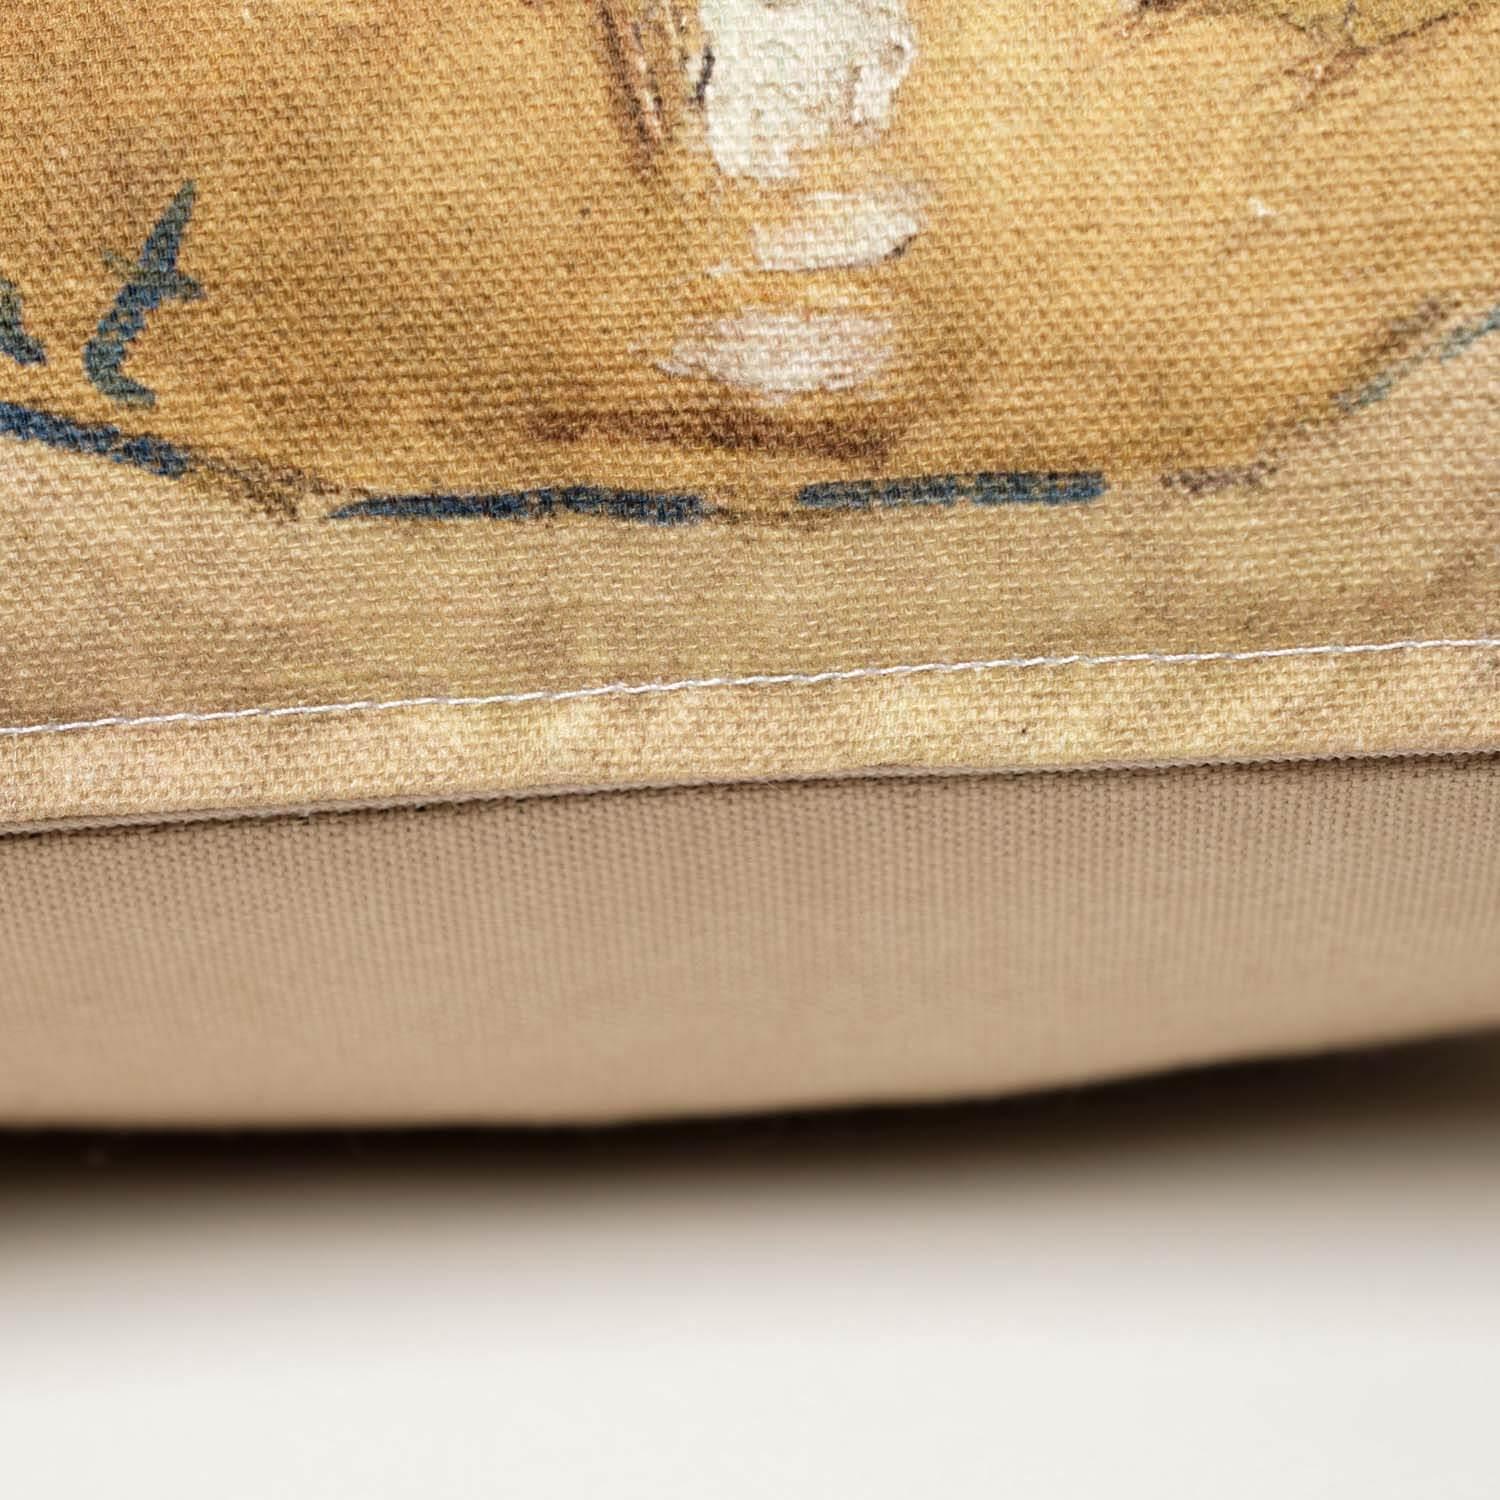 The Grand Canal Venice - Canaletto's - National Gallery Cushion - Handmade Cushions UK - WeLoveCushions